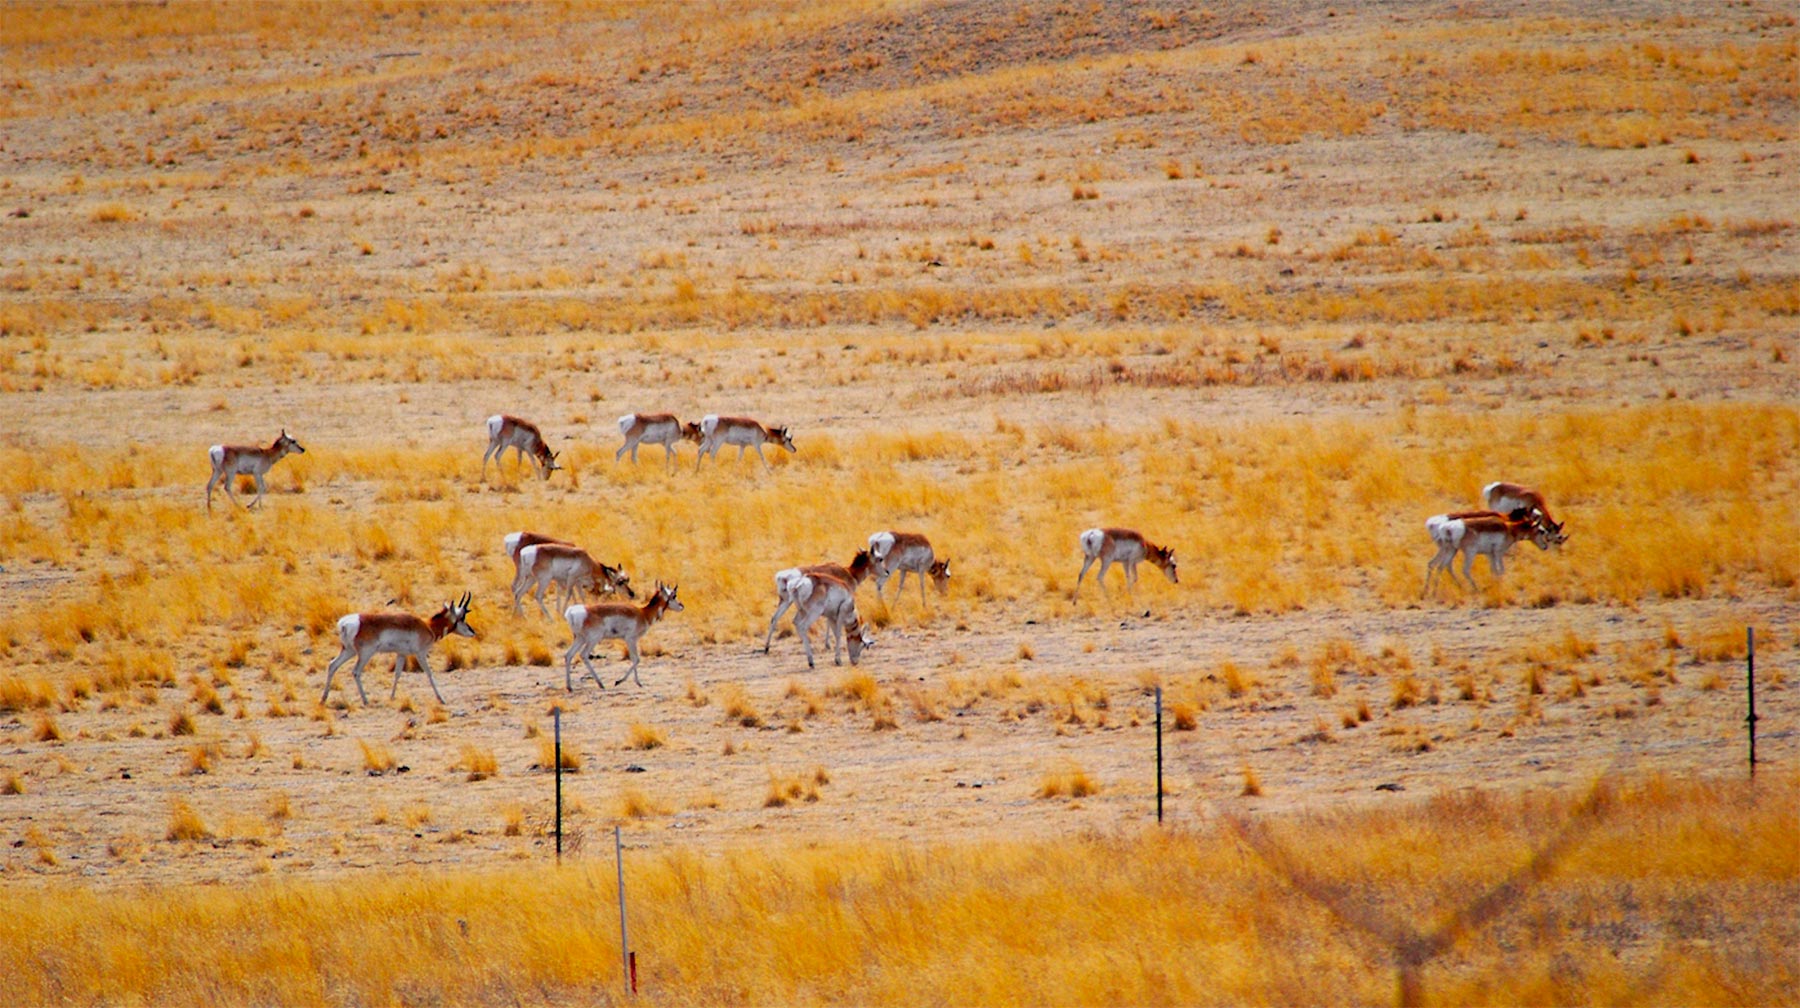 Group of pronghorns grazing in field